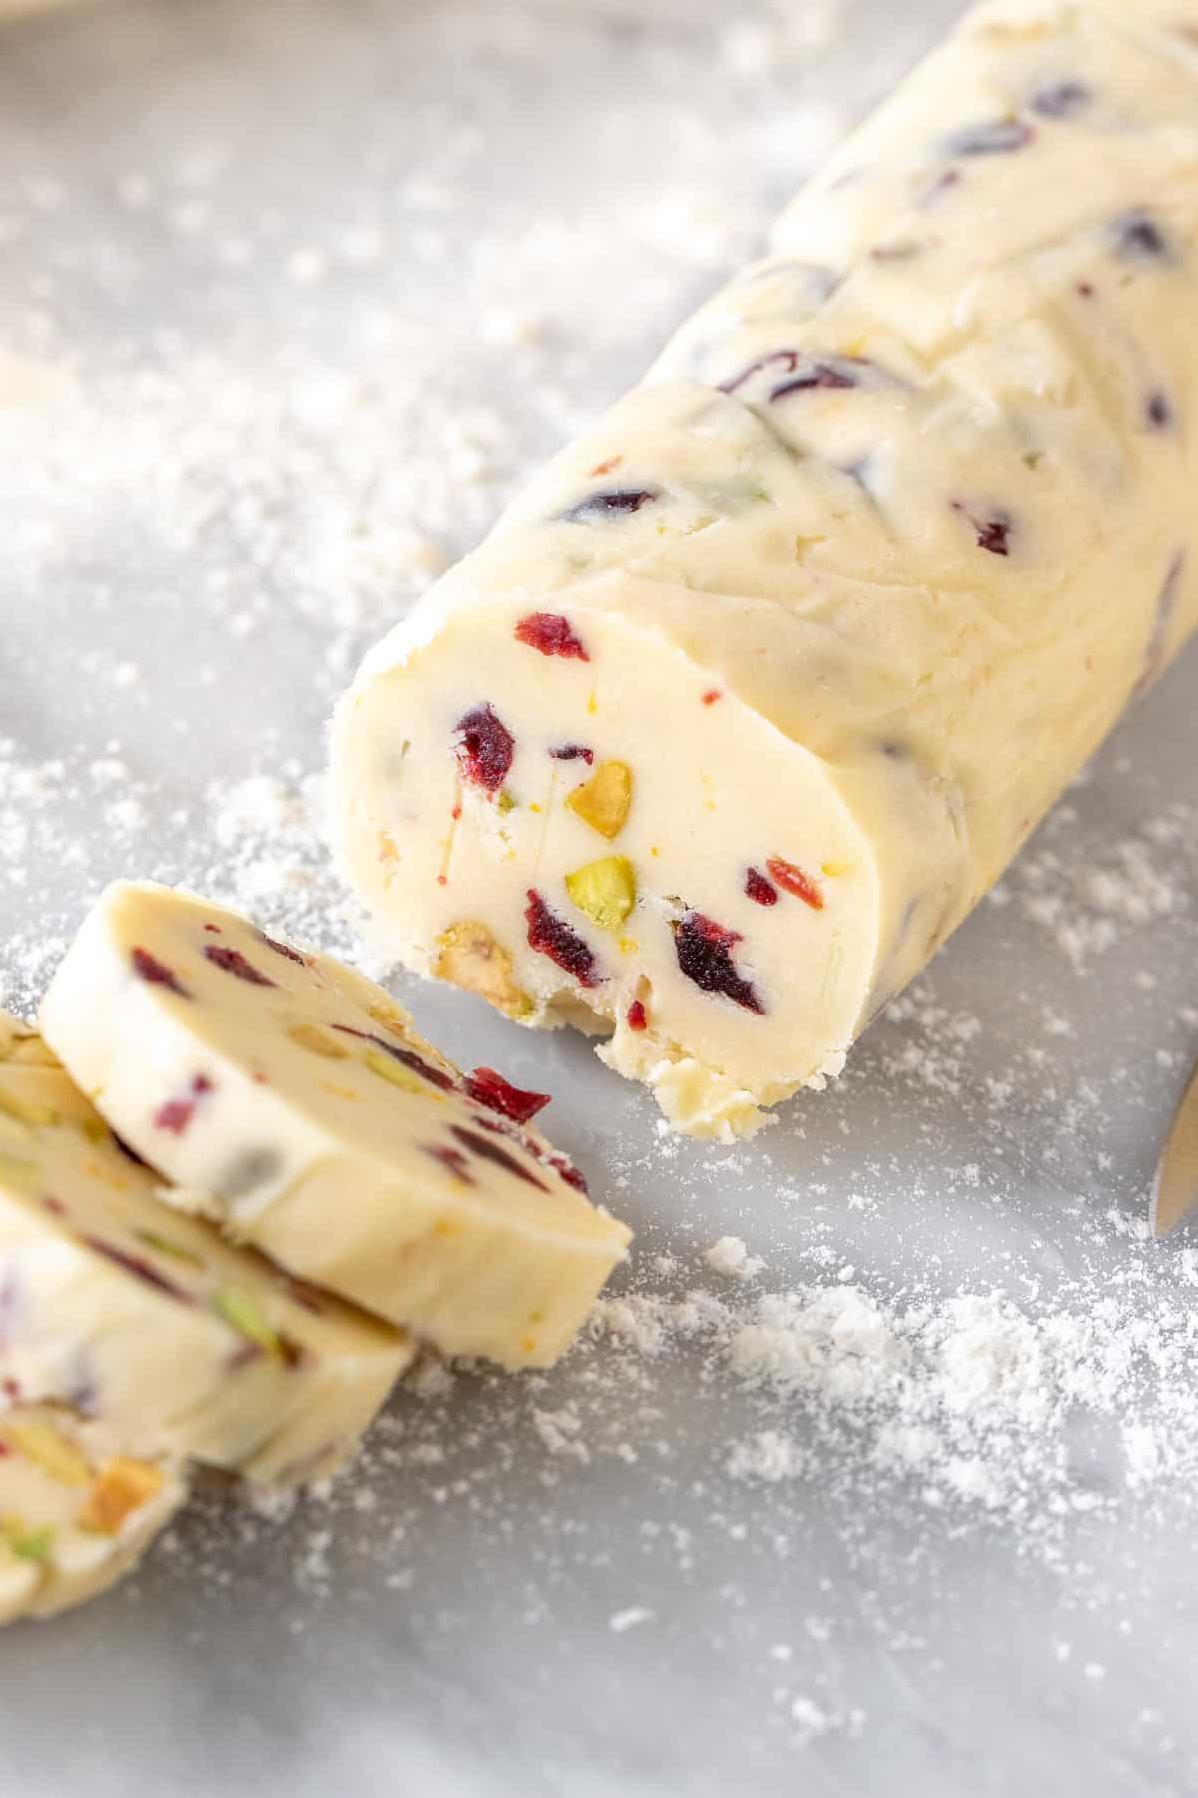  Our Cranberry Pistachio Shortbread bars are a perfect blend of tart, nutty and sweet flavors.